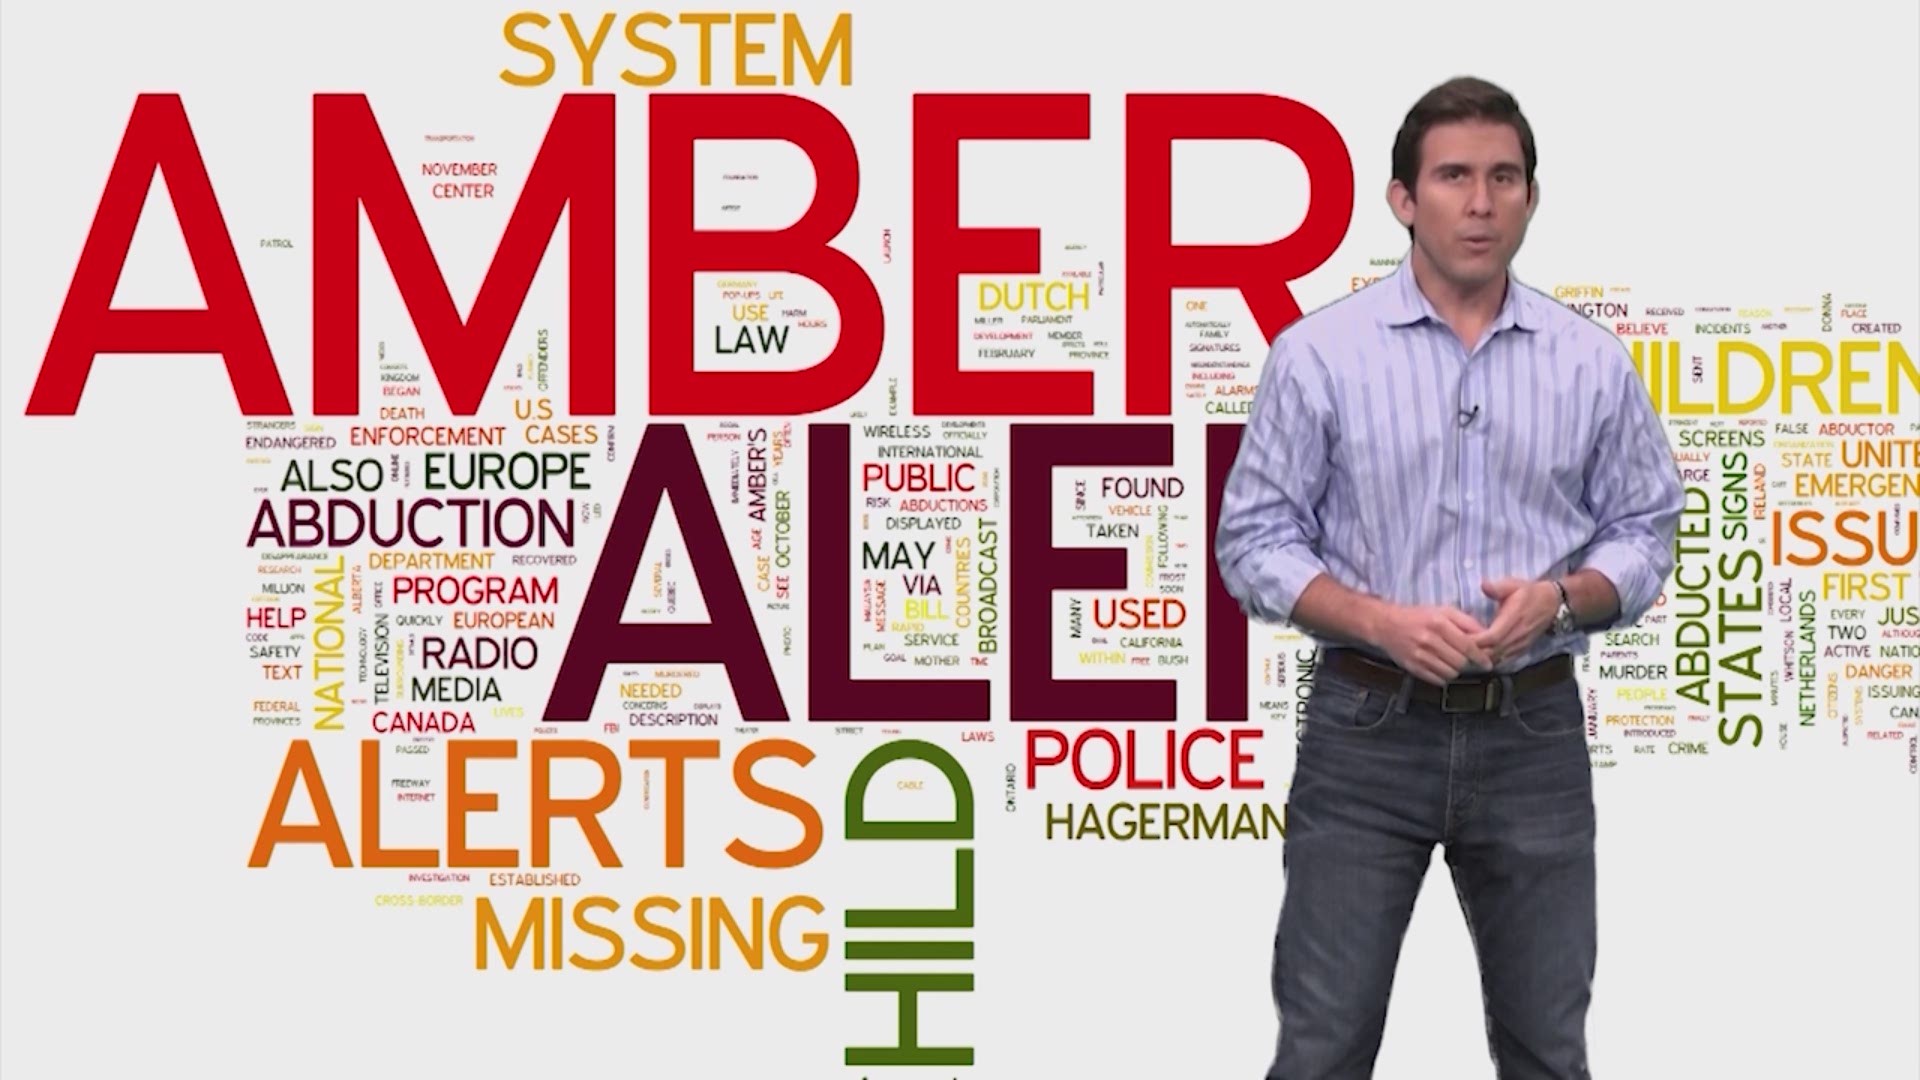 AMBER Alerts come across on TV and buzz our phones all the time, but how do they work?